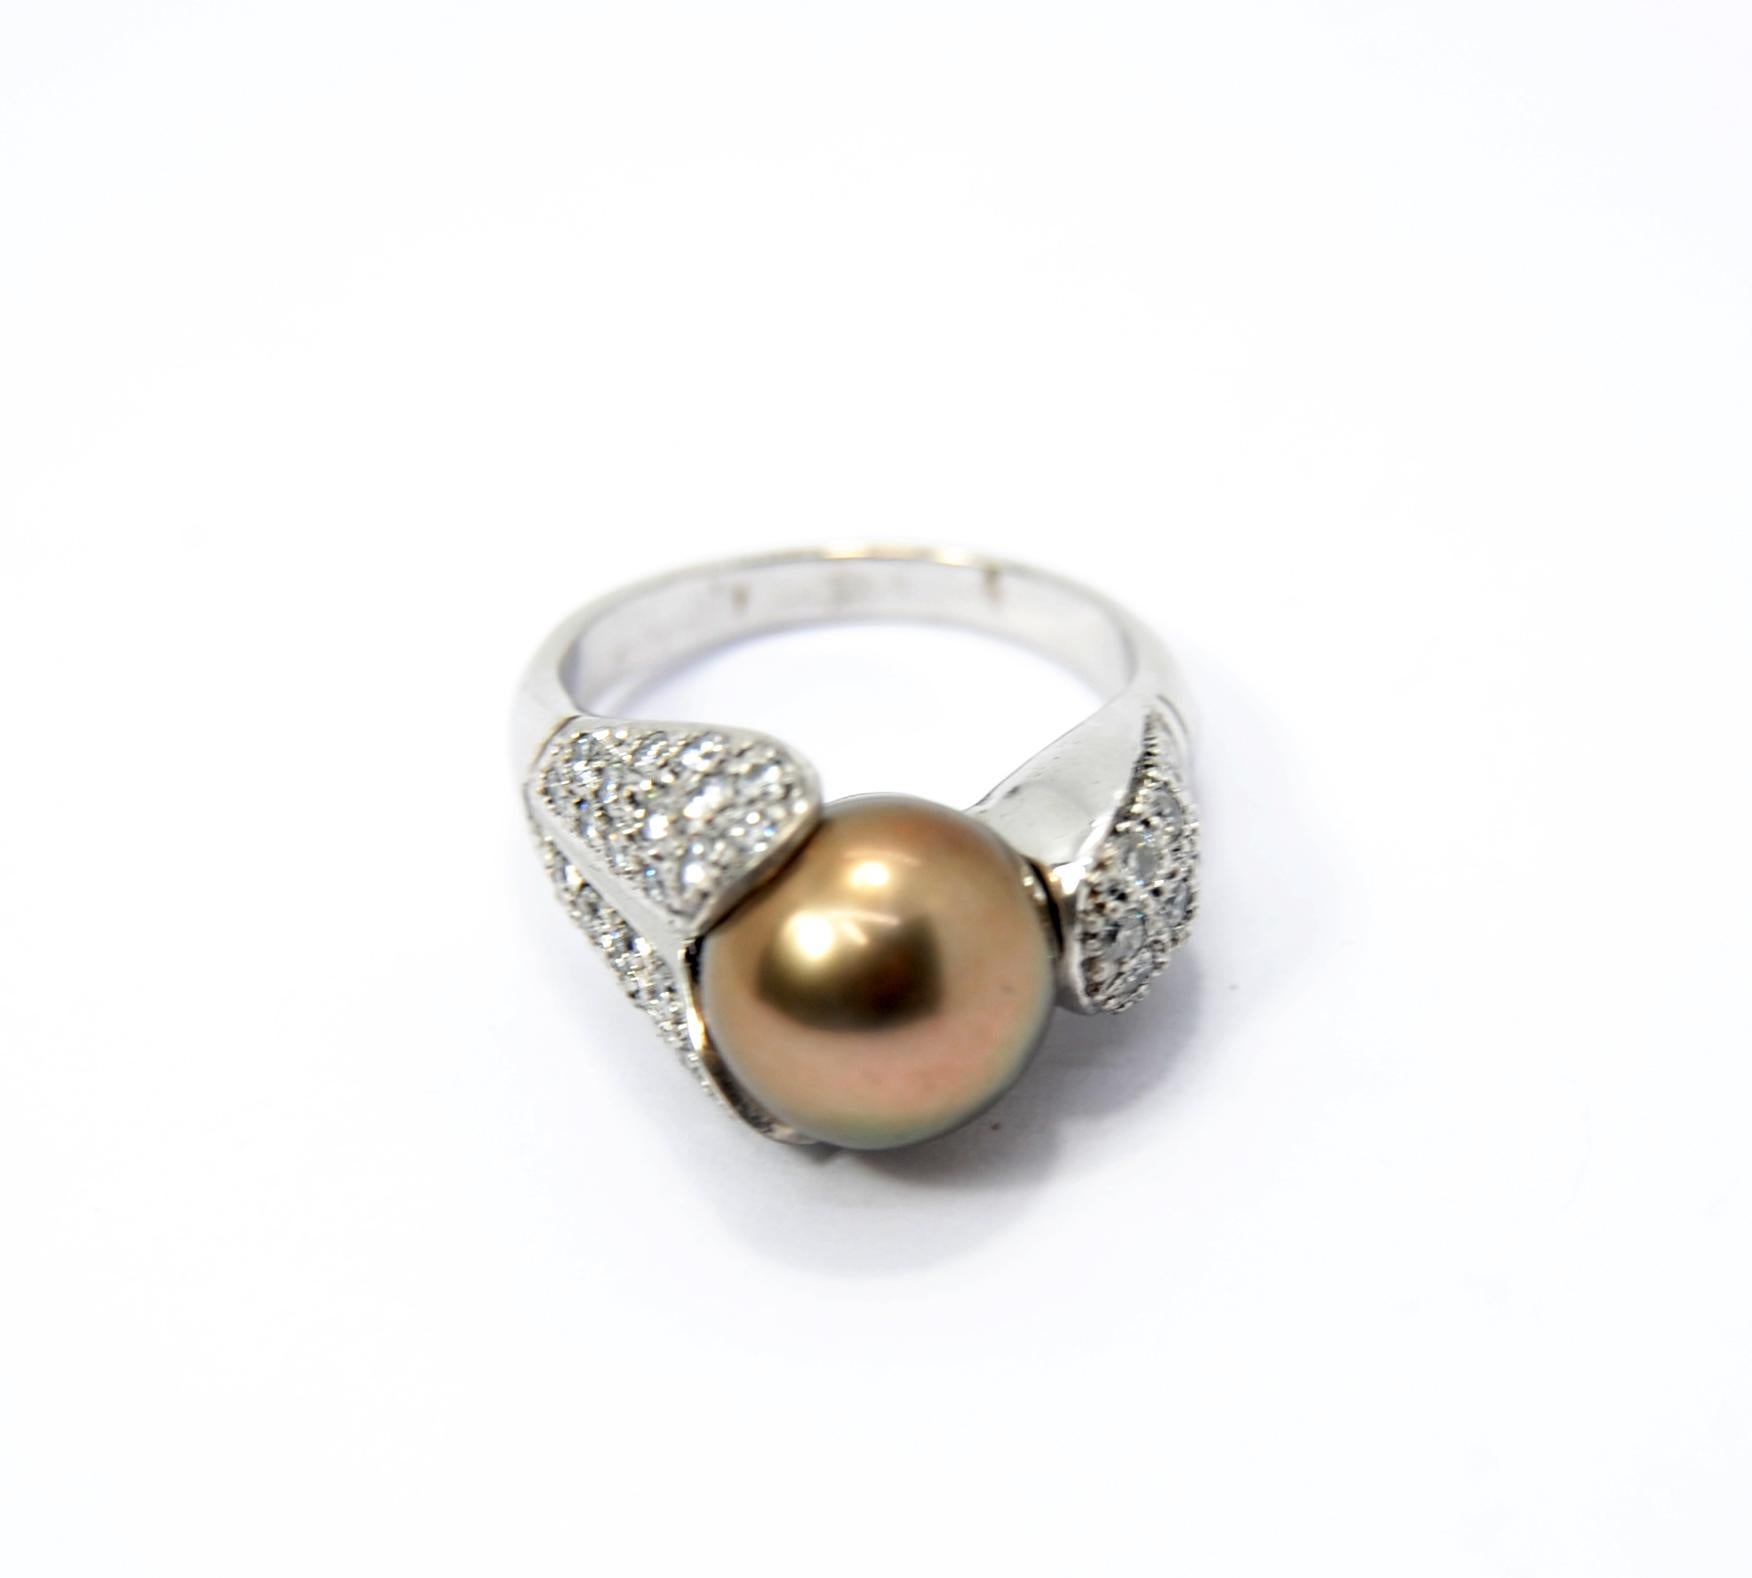 Brilliant Cut Pradera Tahiti Pearl Cocktail Ring with White Diamonds and 18 Karat White Gold For Sale